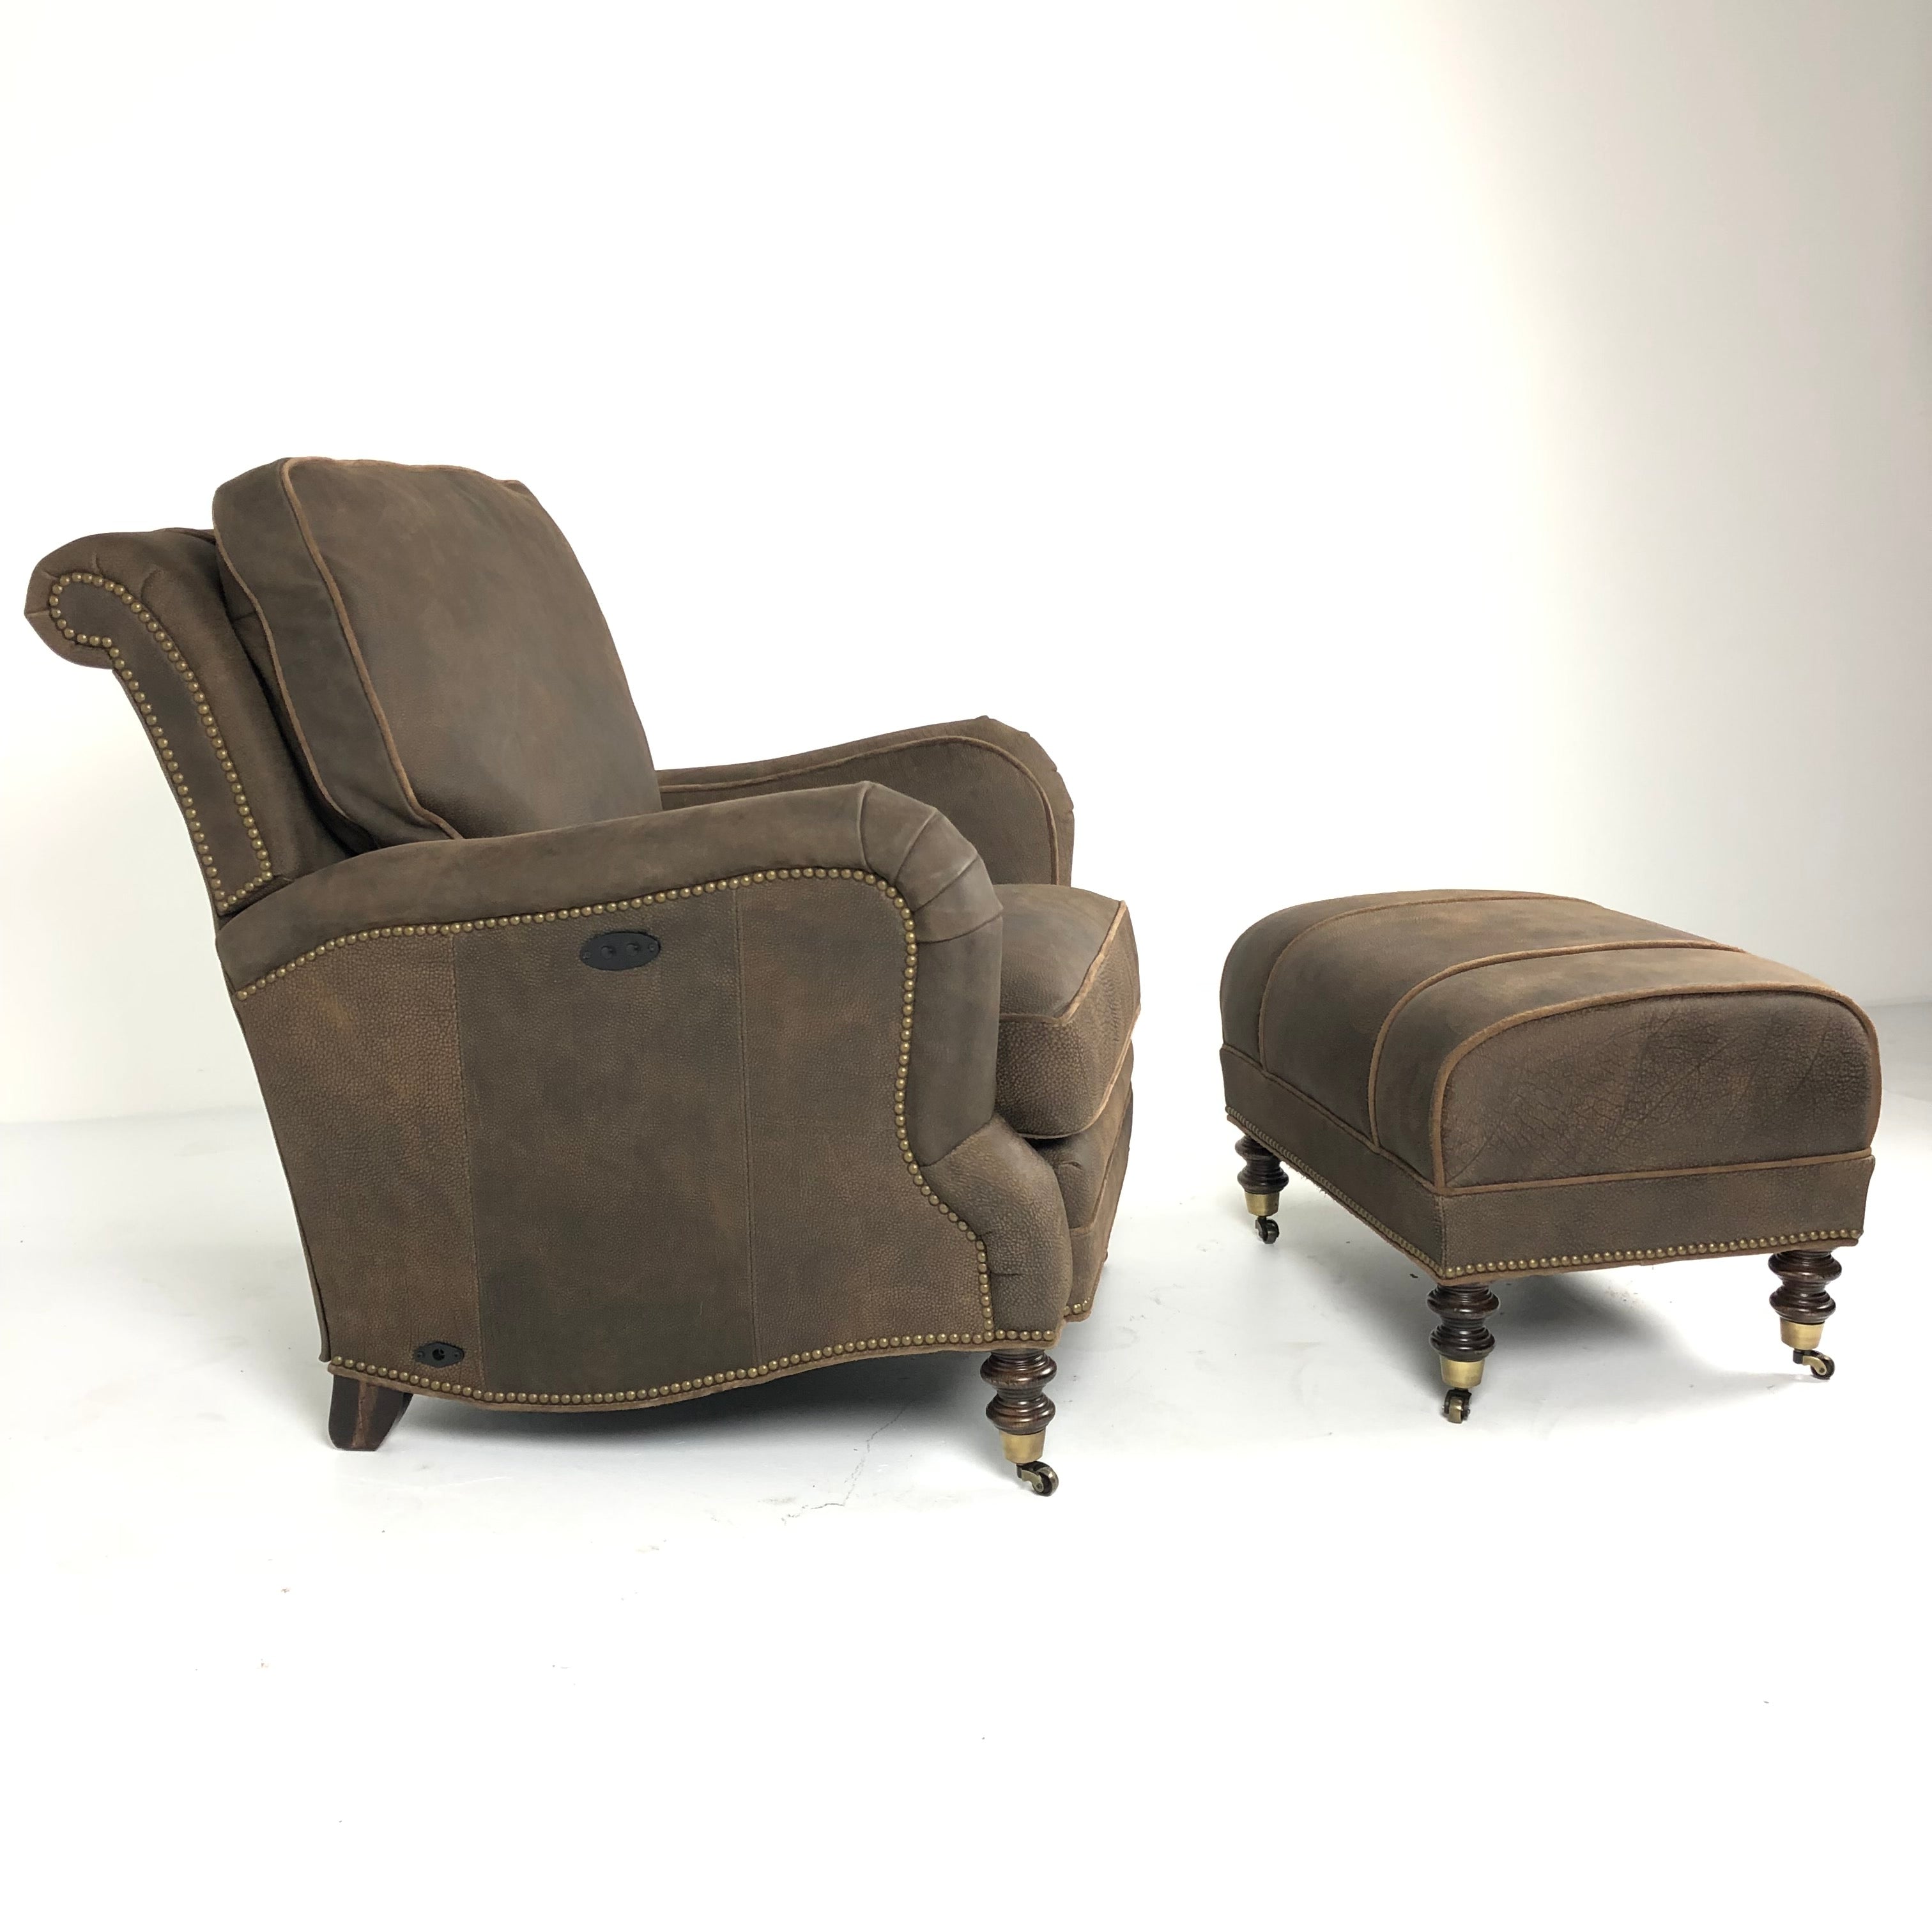 Cyrus Leather Tilt Back Chair & Ottoman by Wesley Hall shown in Zulu Chocolate leather - side view